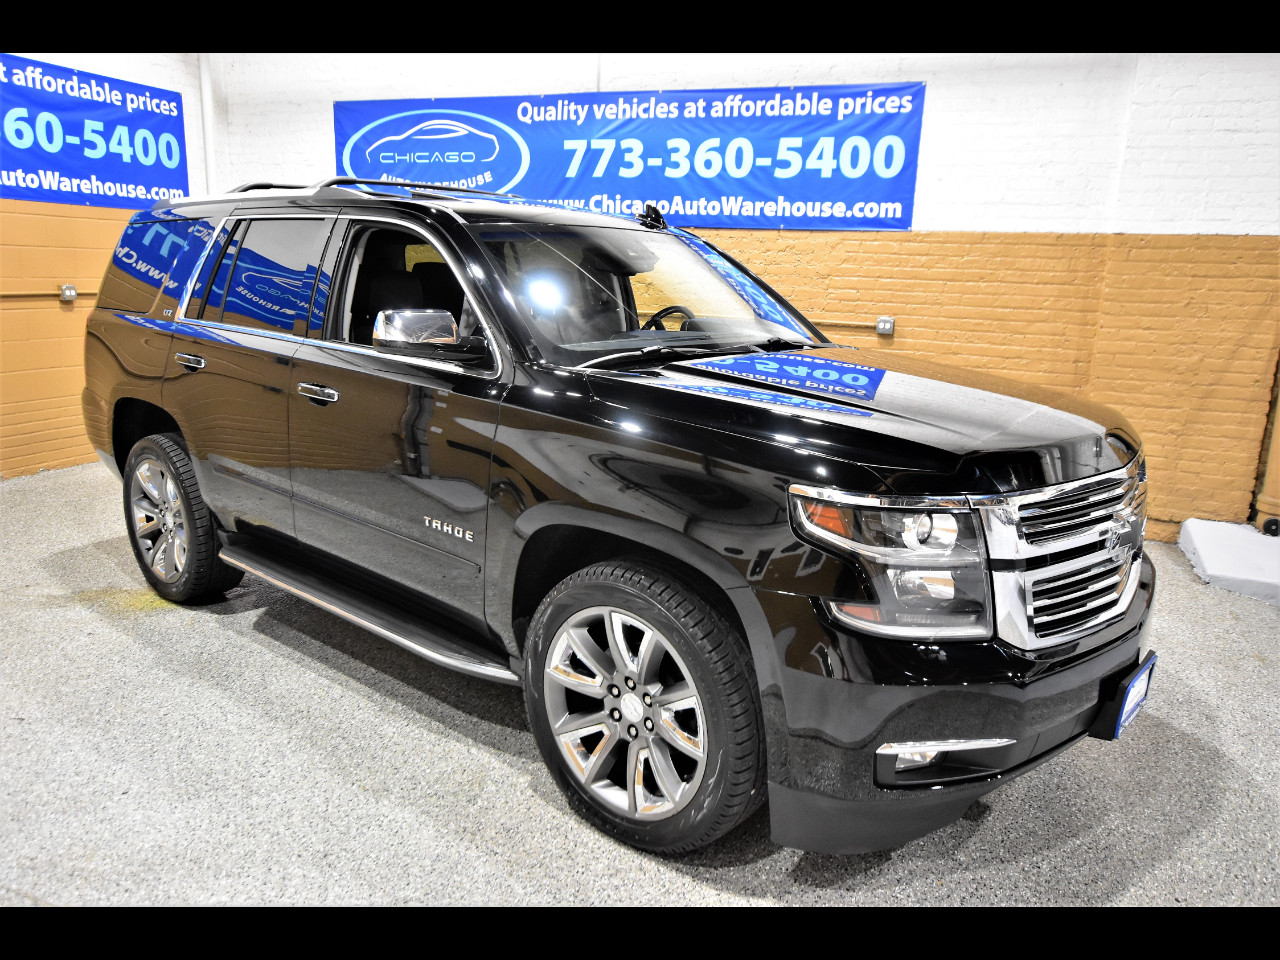 Used Chevrolet Tahoe Chicago Il